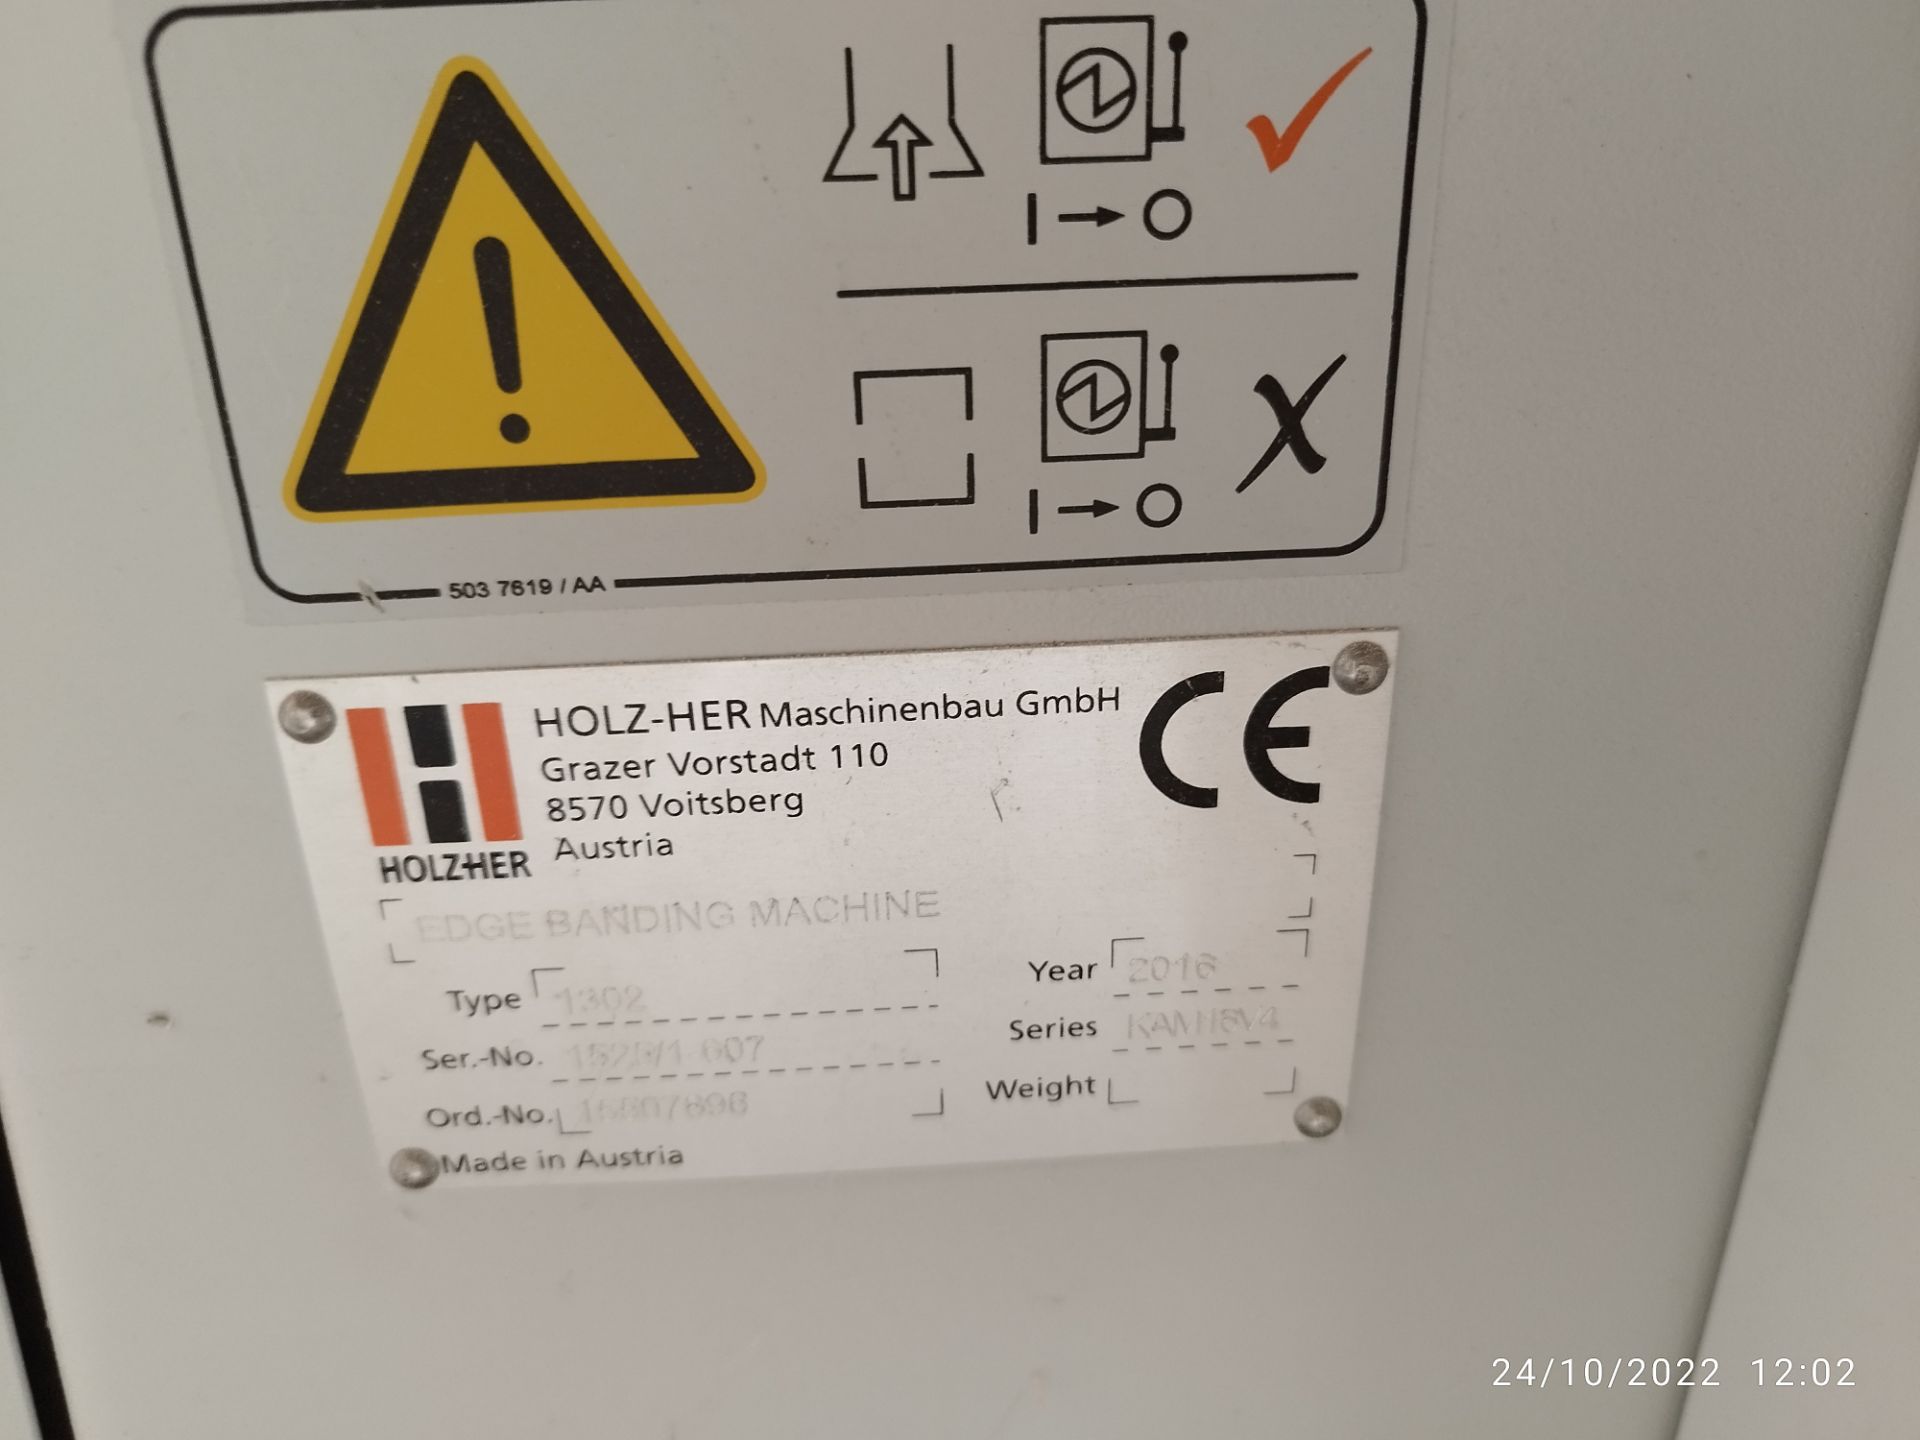 Holzher Uno 1302 Edge Banding Machine, Serial Number 1525/1-607, Series KAM16V4 (2016) ( - Image 3 of 3